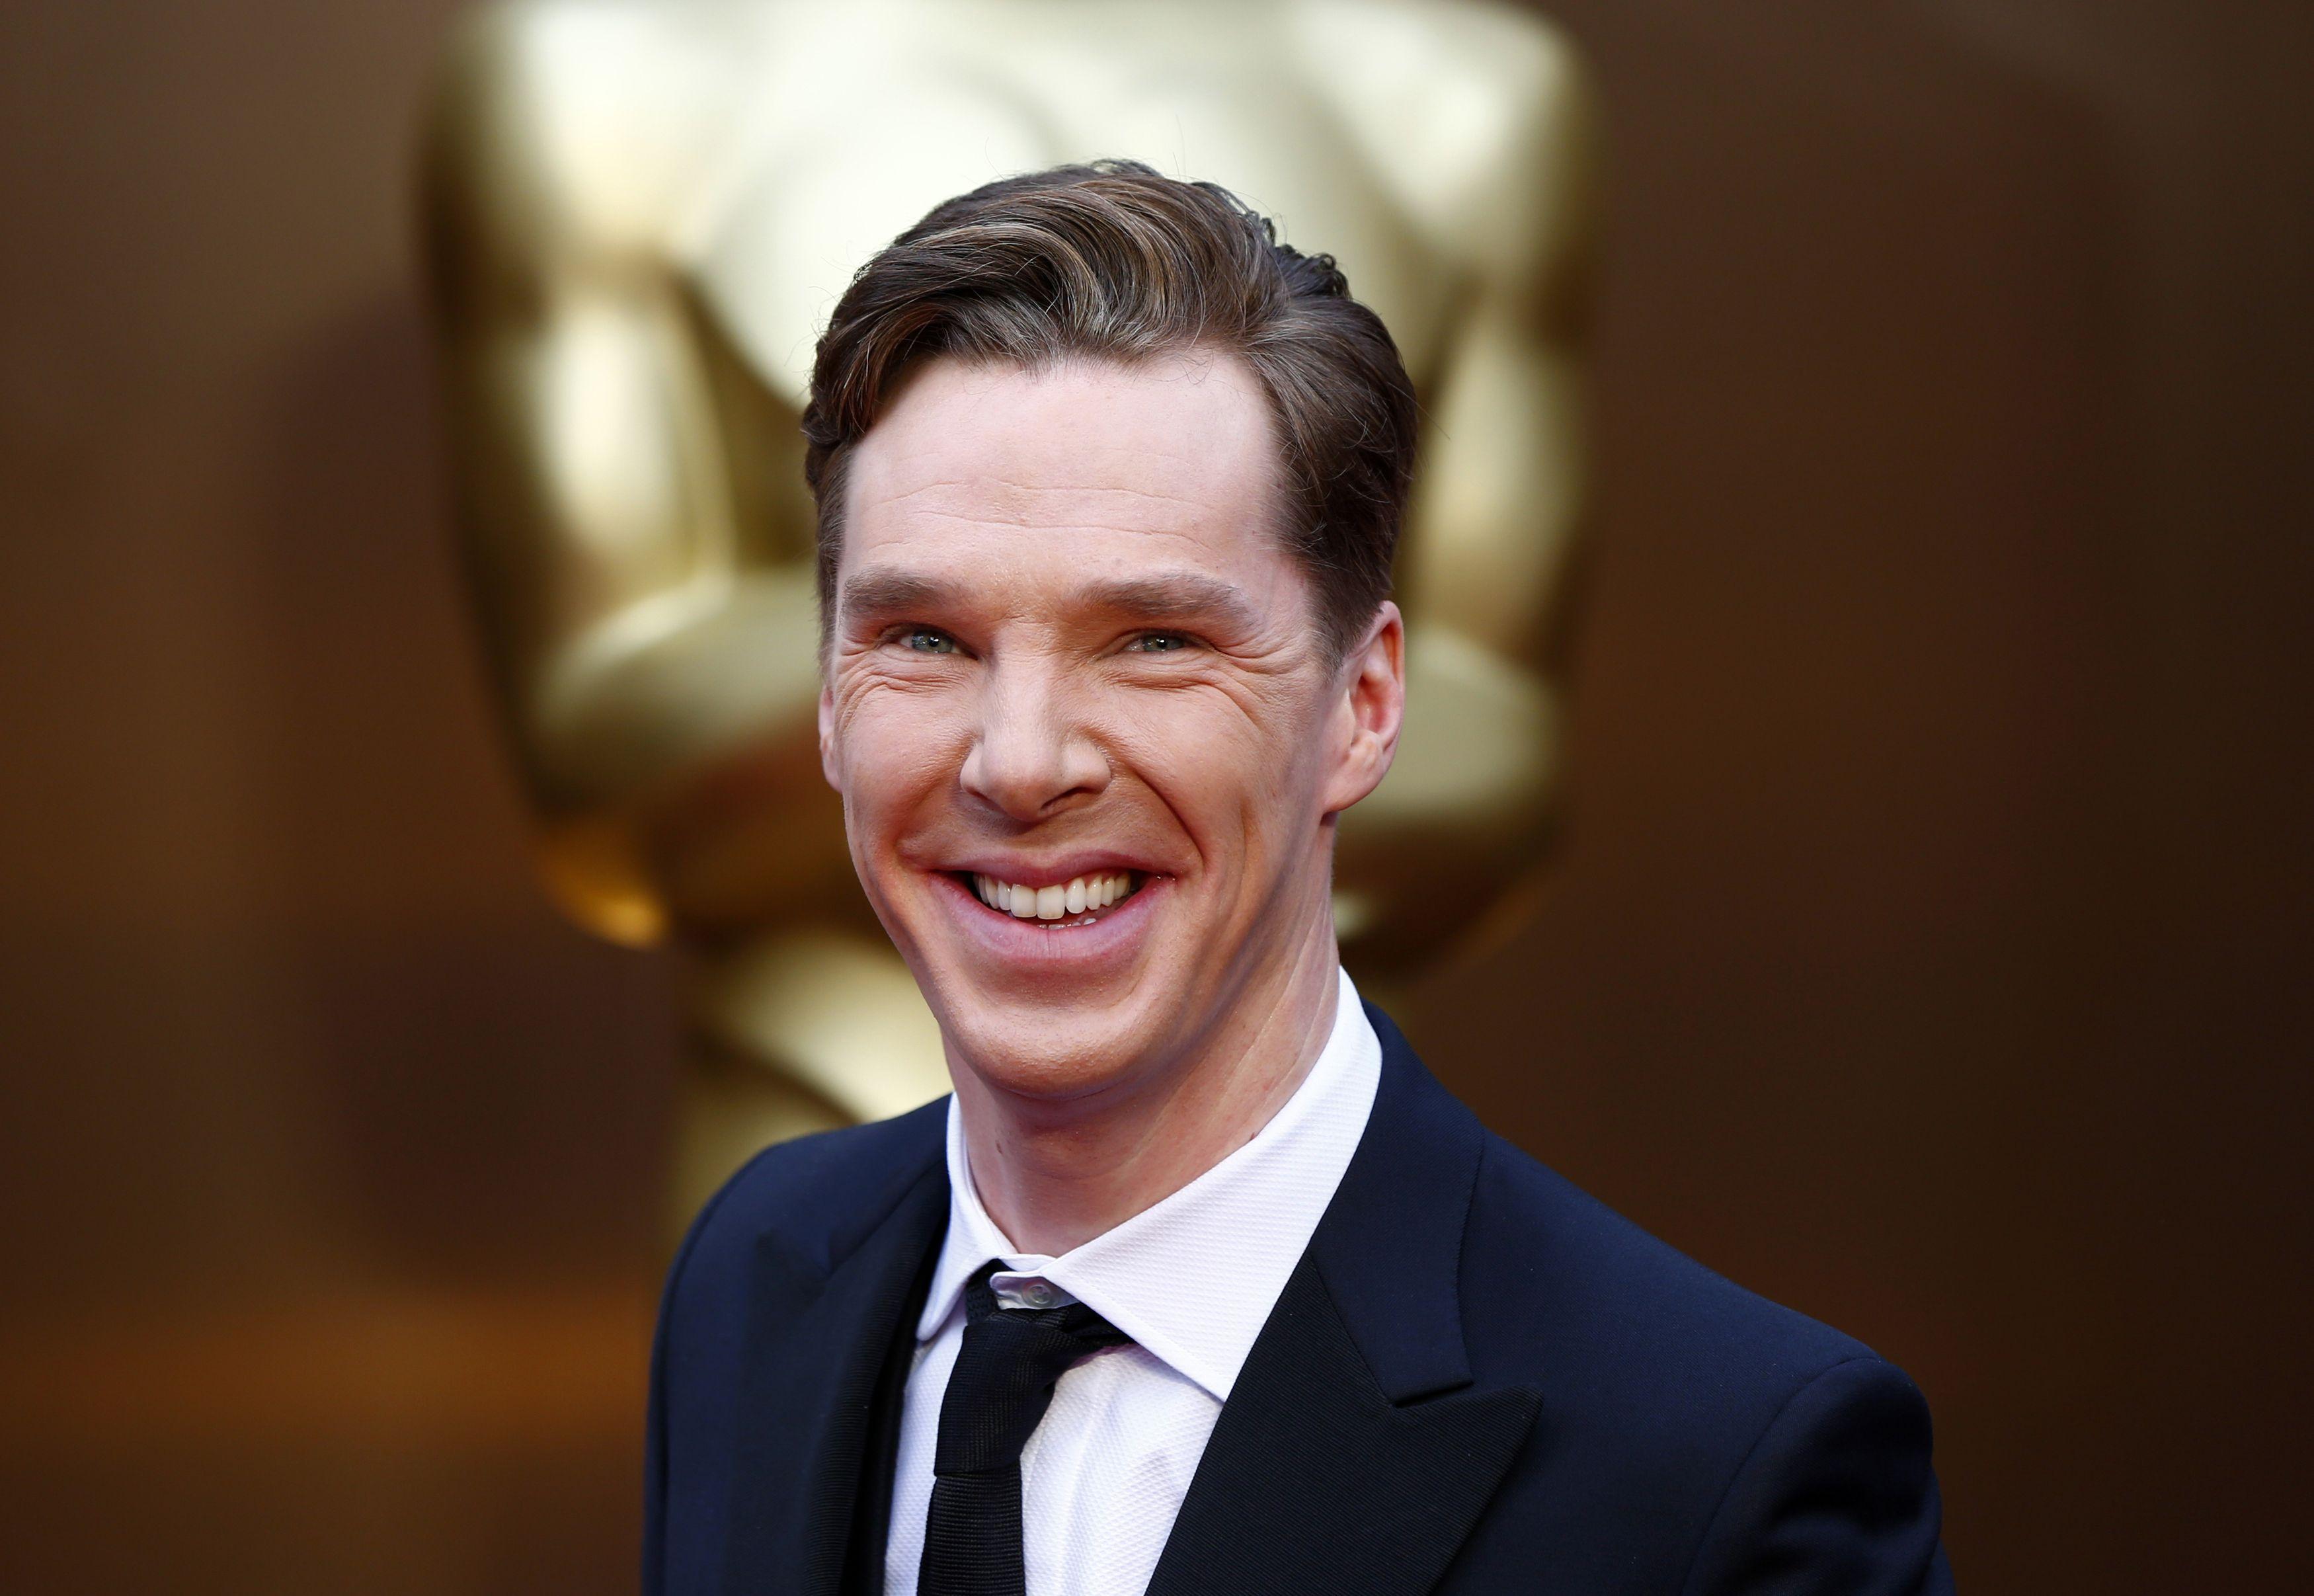 Benedict Cumberbatch Wallpaper High Resolution and Quality Download